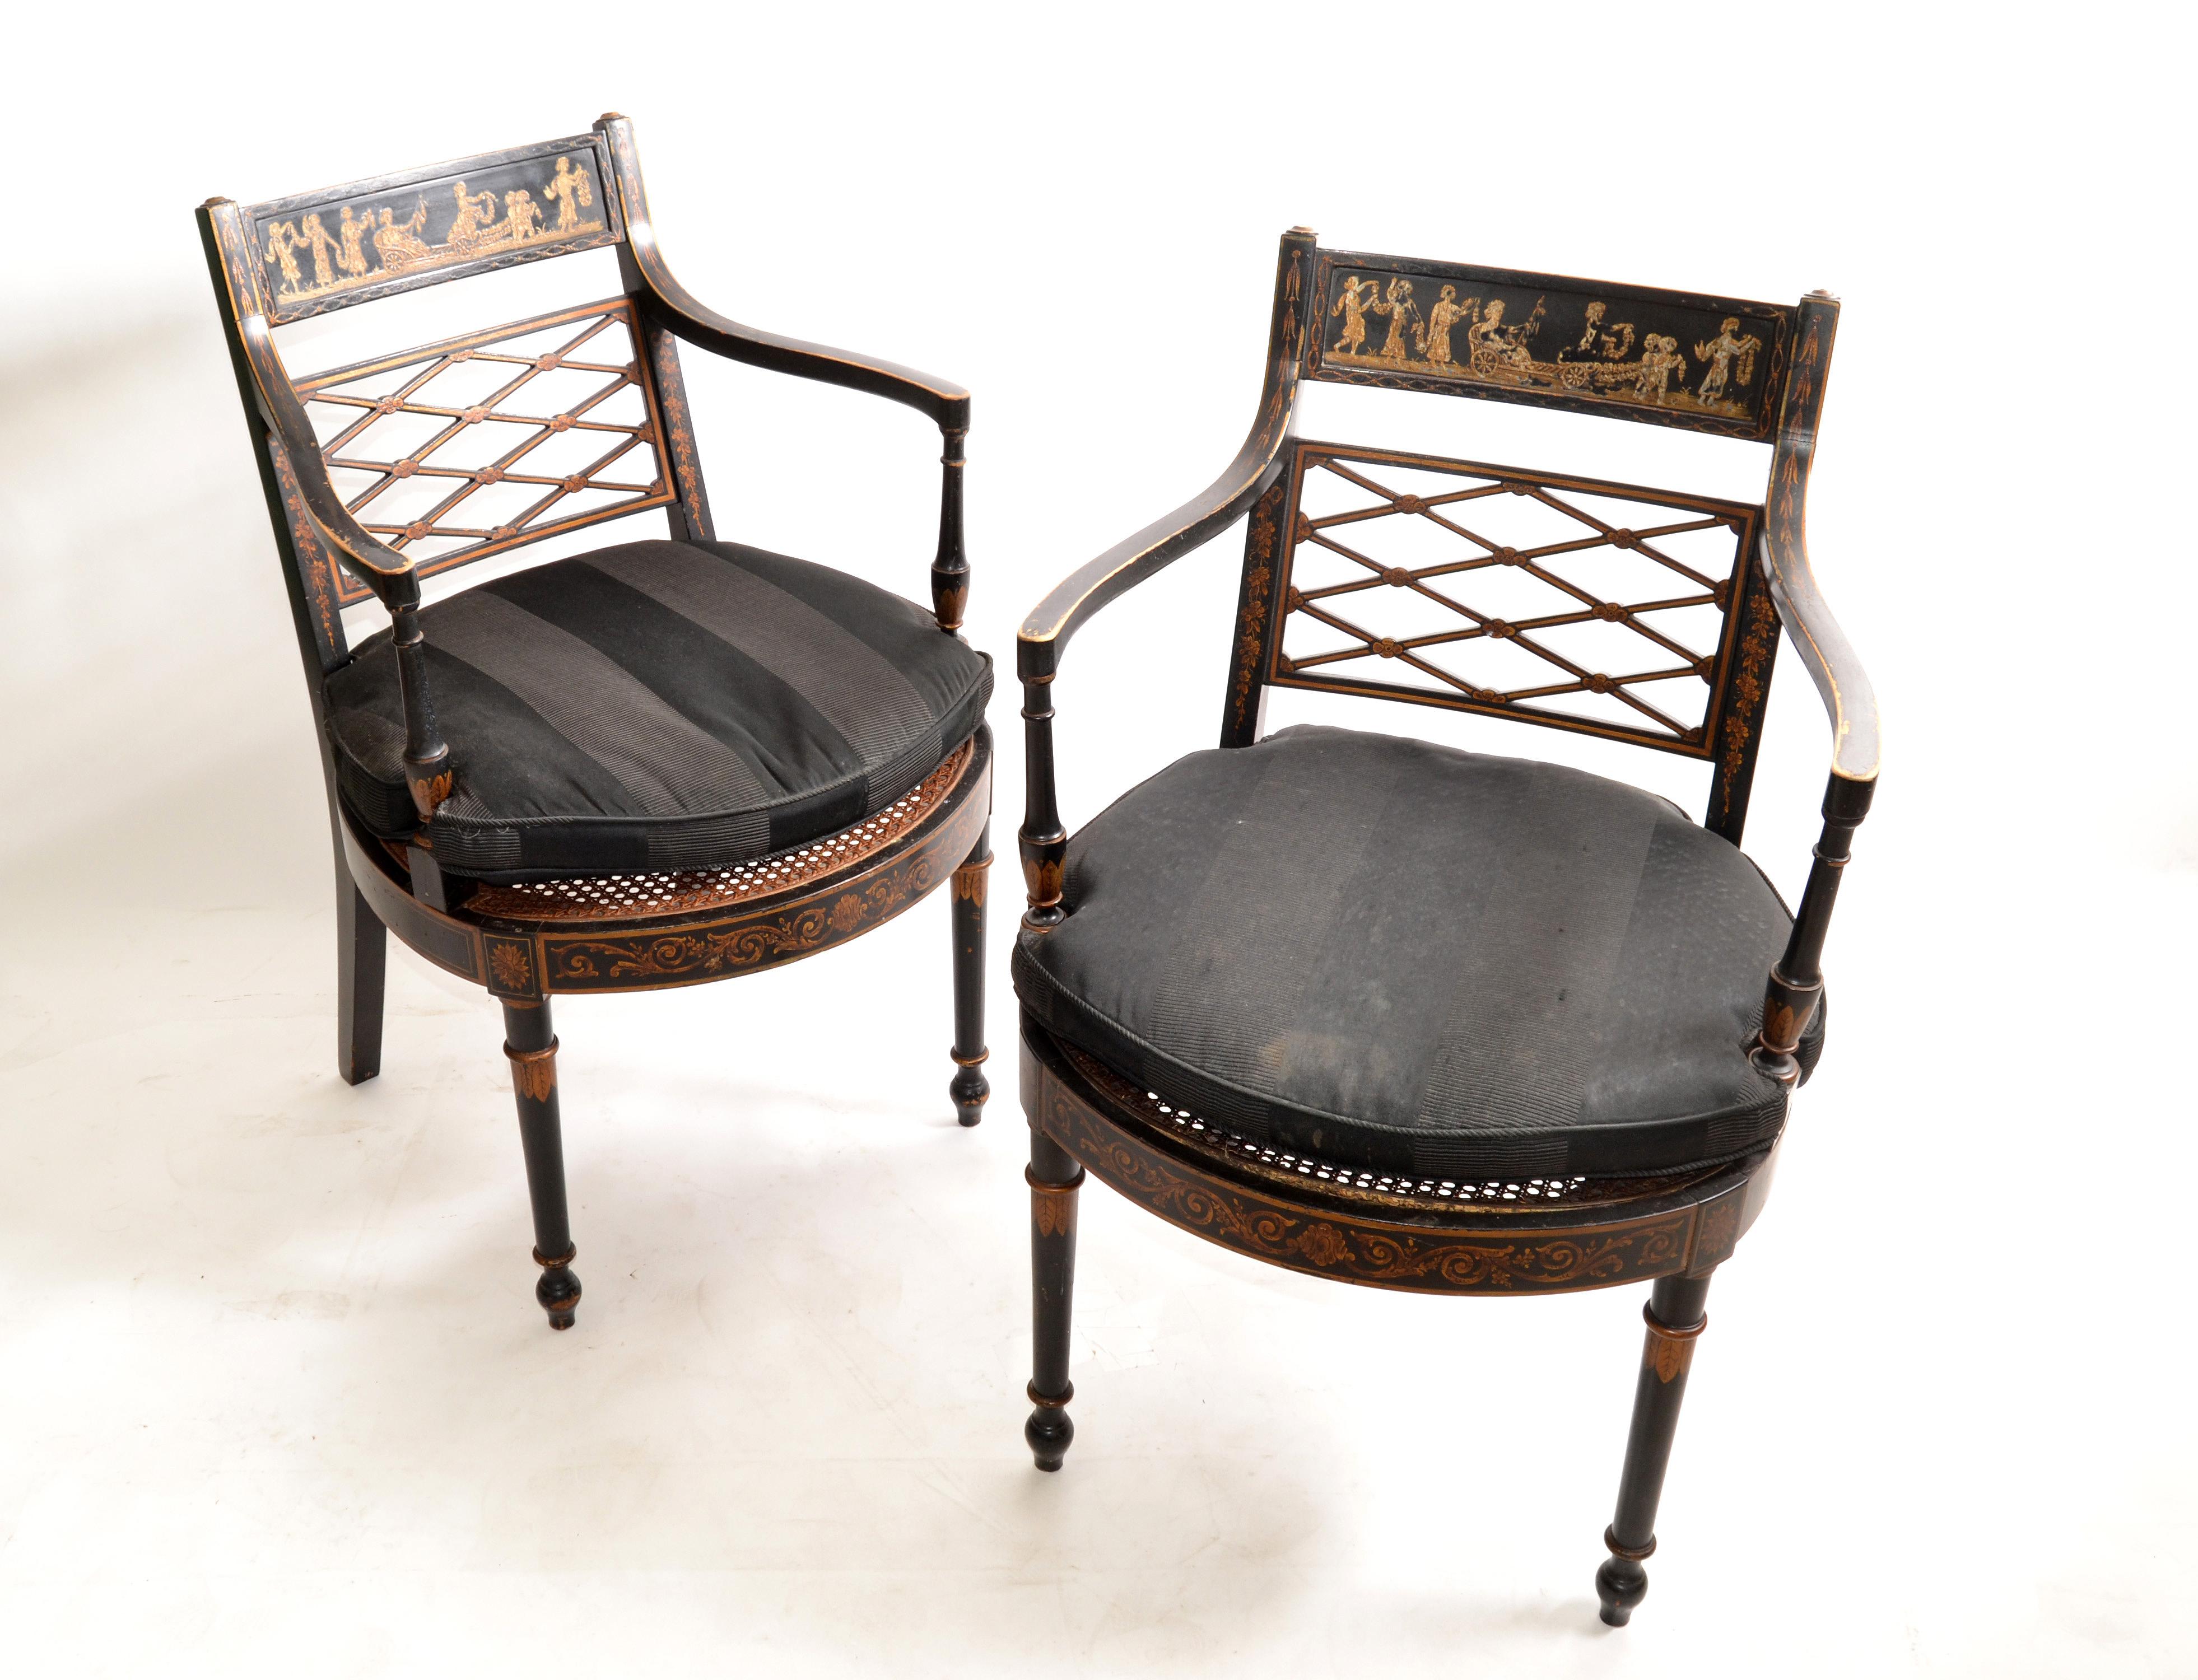 Late 19th century one of a kind pair of chinoiserie antique armchairs black lacquered & gold finish with hand woven cane seats. The Backrest is thick Gilt finish depicting a travel scene. 
We have the original form fit seat cushions but recommend